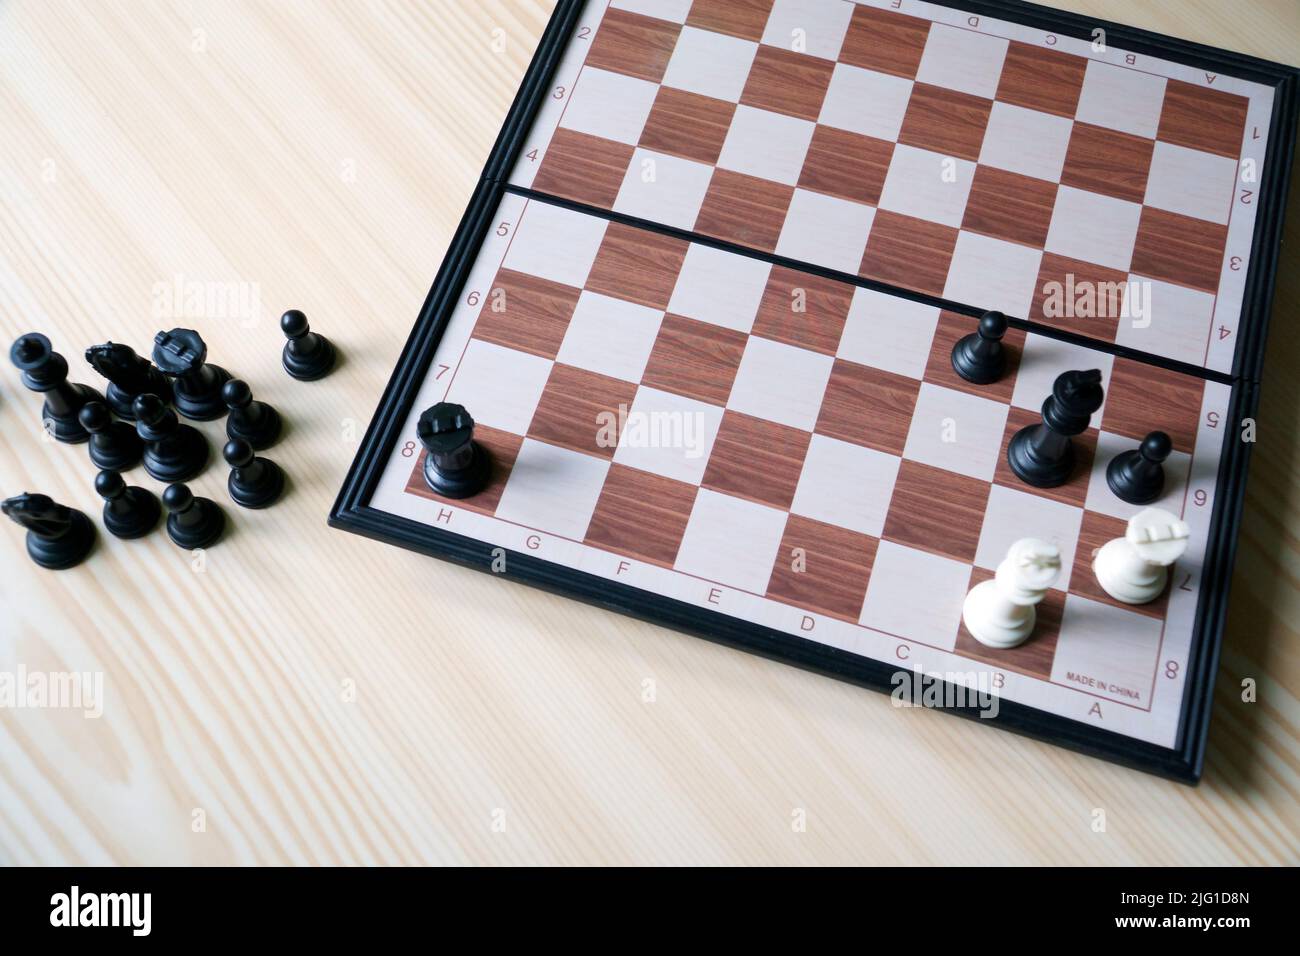 The chess. Checkmate position on the board game in a view from the top angle. The game board is on the table. Stock Photo